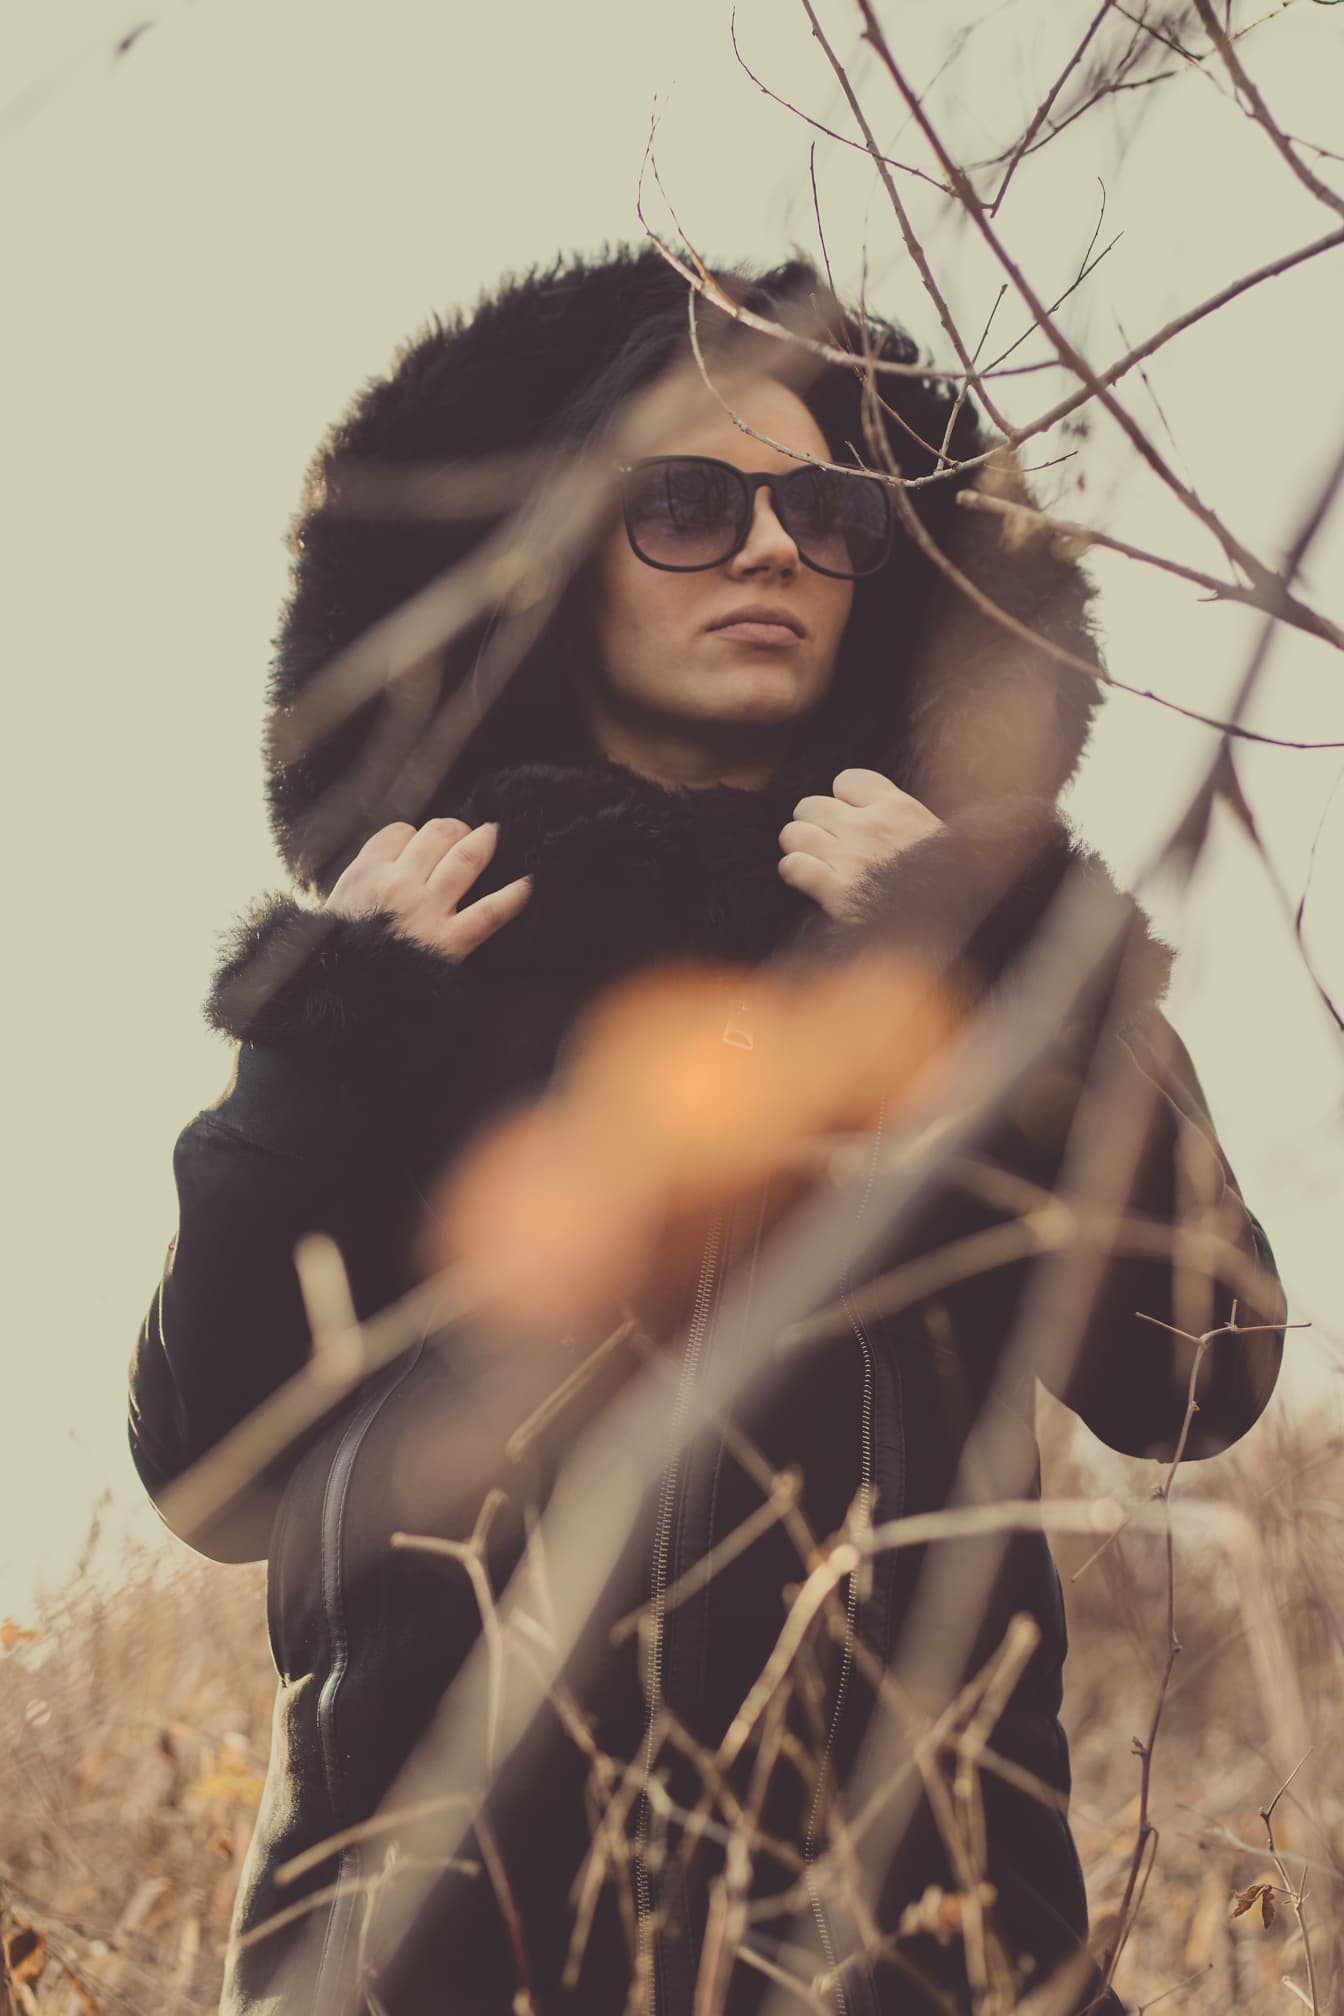 Portrait of a woman wearing a hooded fur jacket and sunglasses